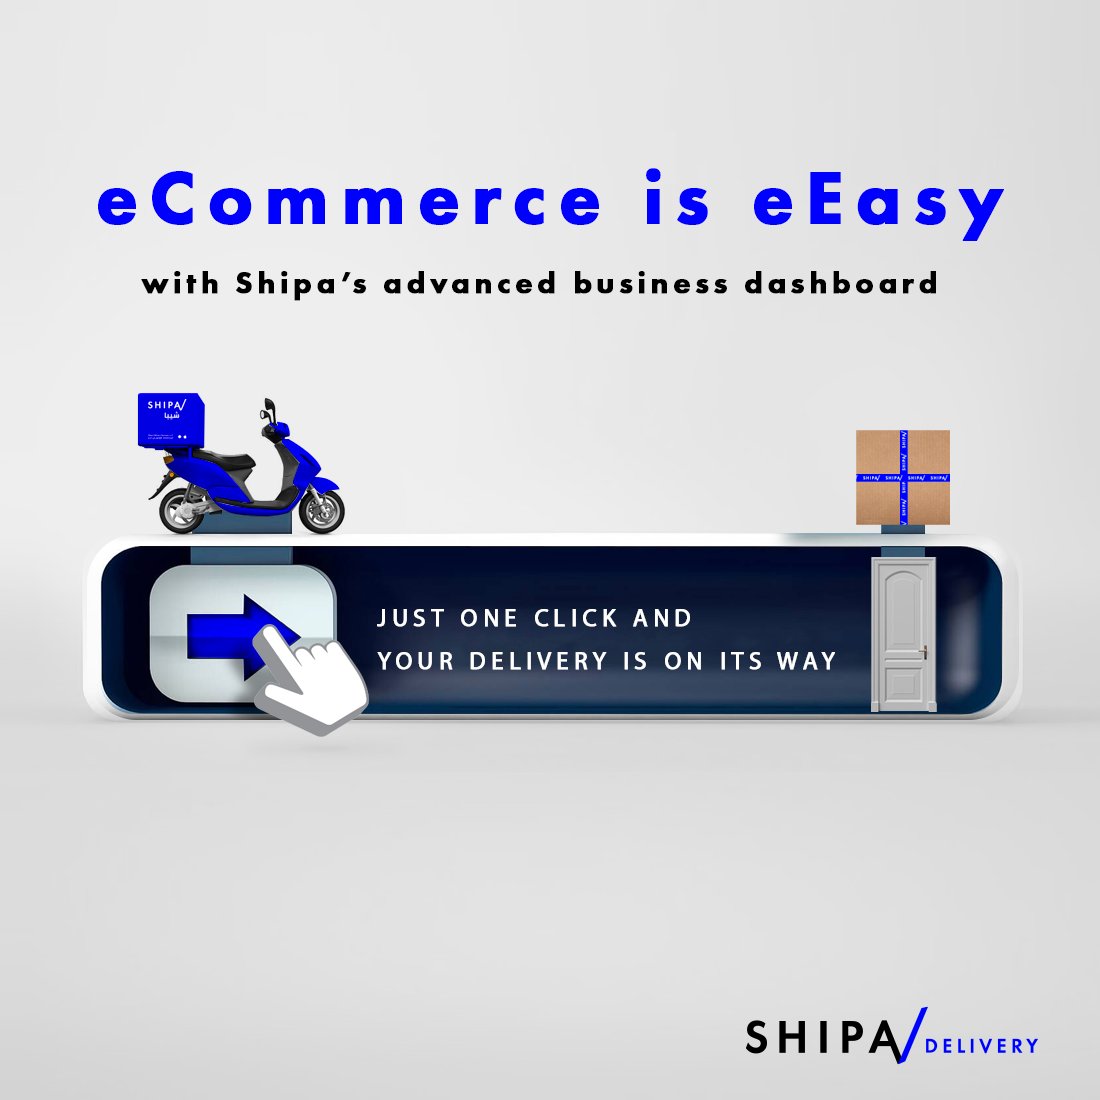 JUST ONE CLICK AND YOUR DELIVERY IS ON ITS WAY
eCommerce is eEasy with Shipa’s advanced business dashboard
#eCommerceMadeEasy #shipadelivery